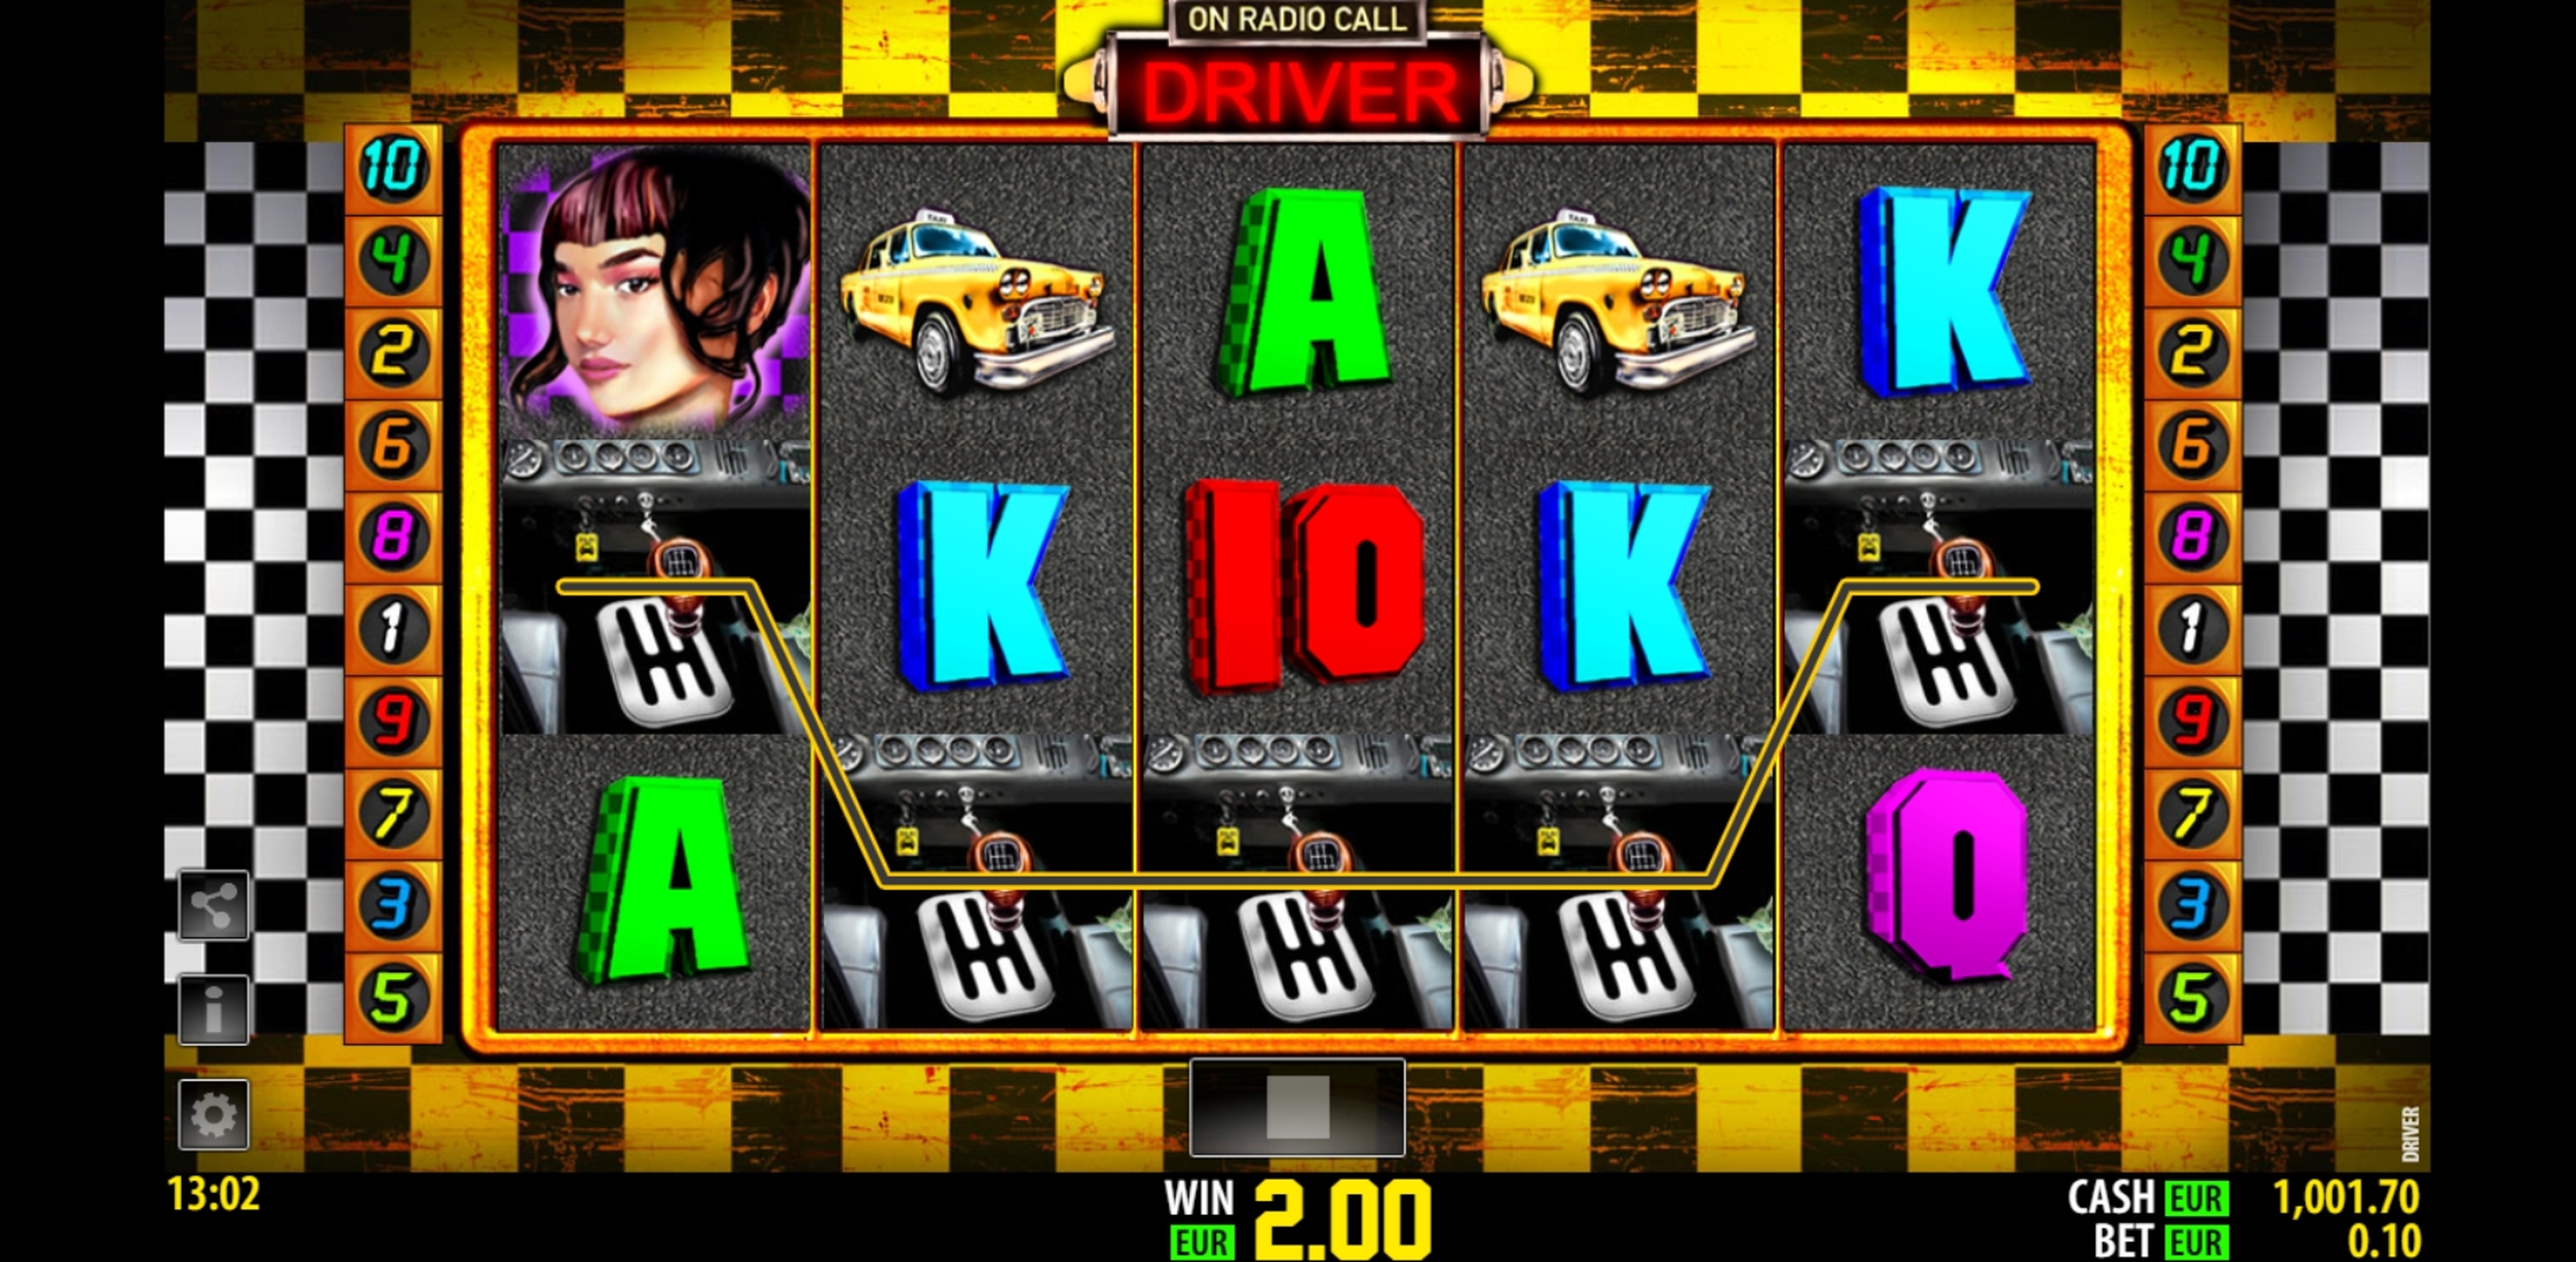 Win Money in Driver Free Slot Game by Nazionale Elettronica